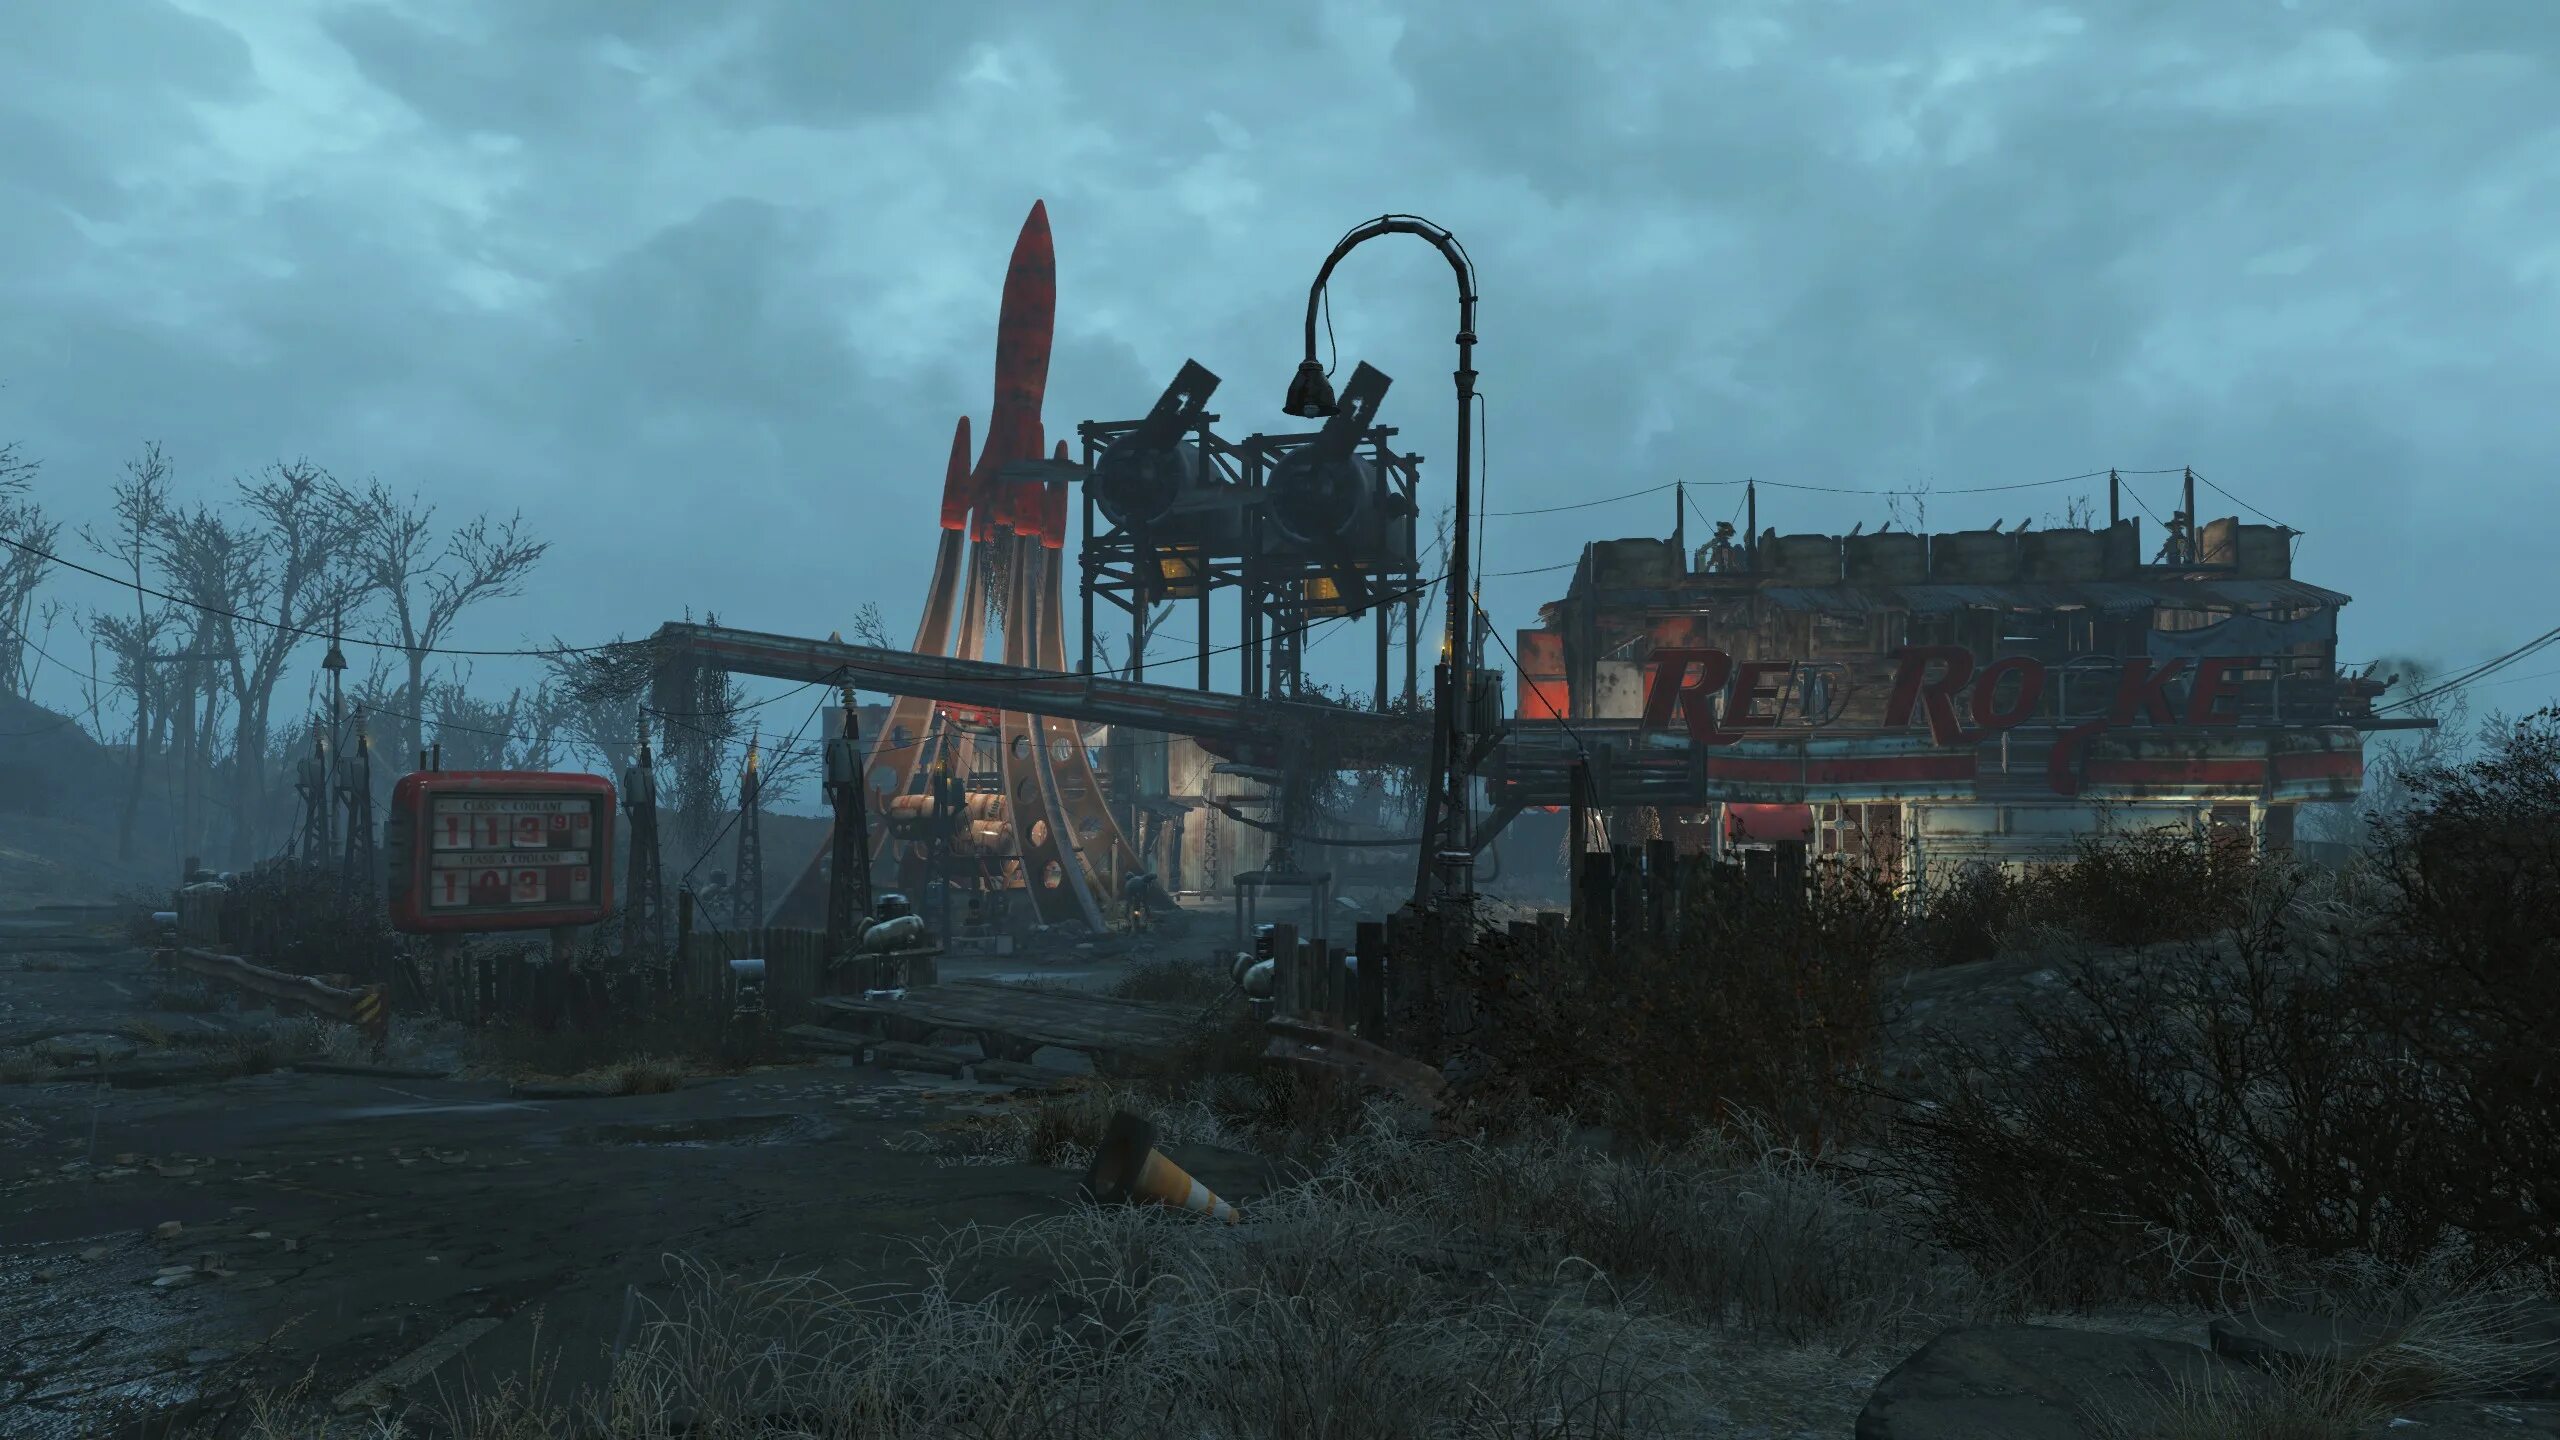 Fallout 4 Red Rocket. Фоллаут Red Rocket. Красная ракета фоллаут 4. Красная ракета фаллаут4.